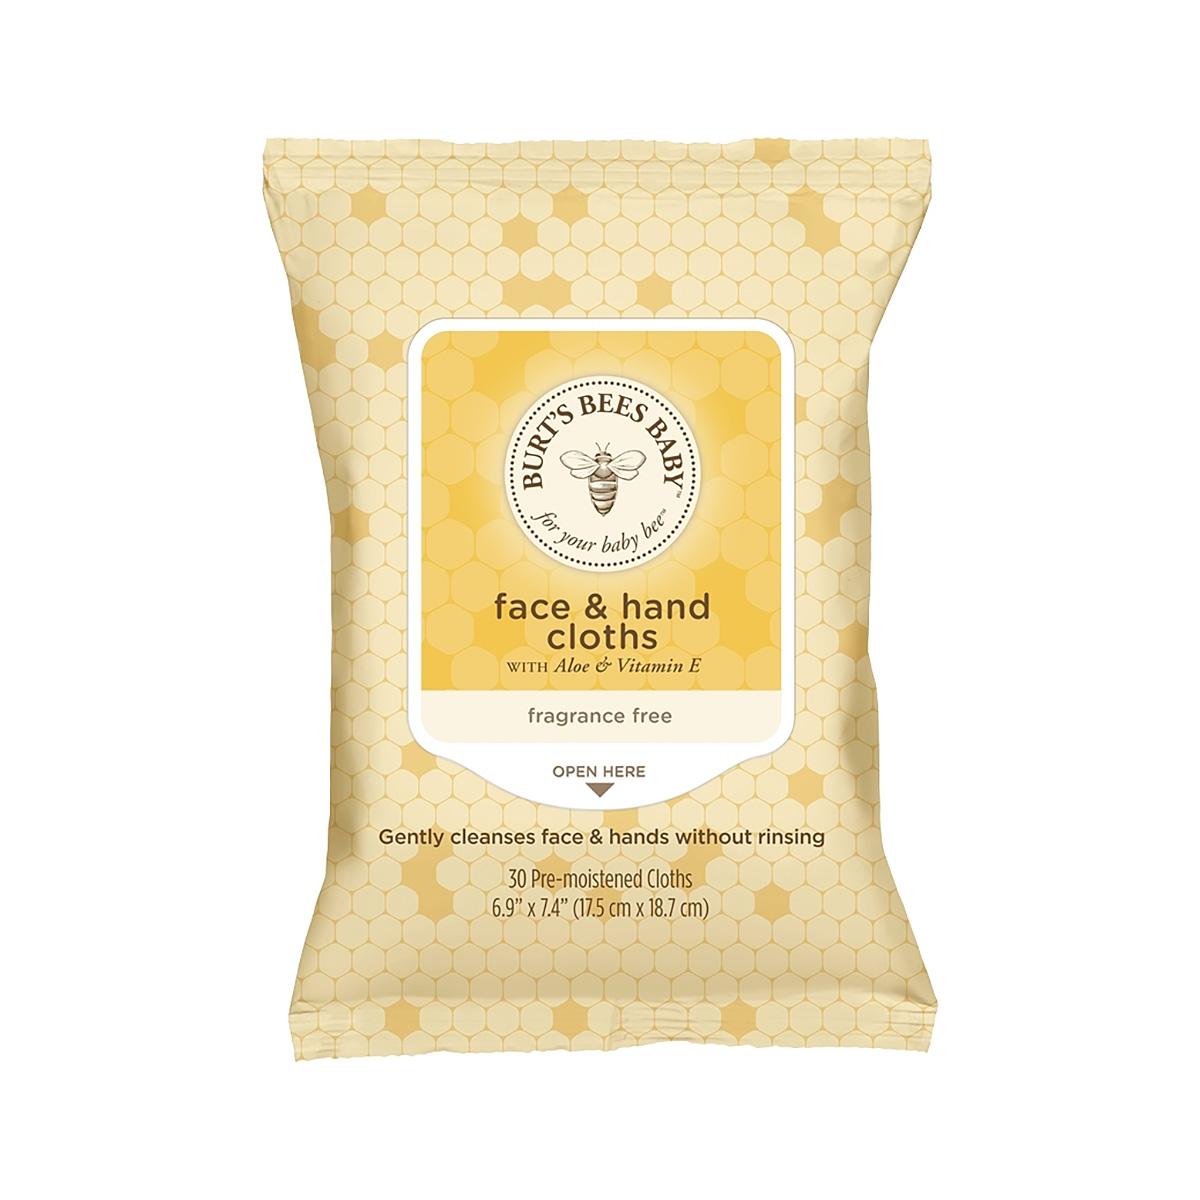  Baby Bee Fragrance Free Wipes